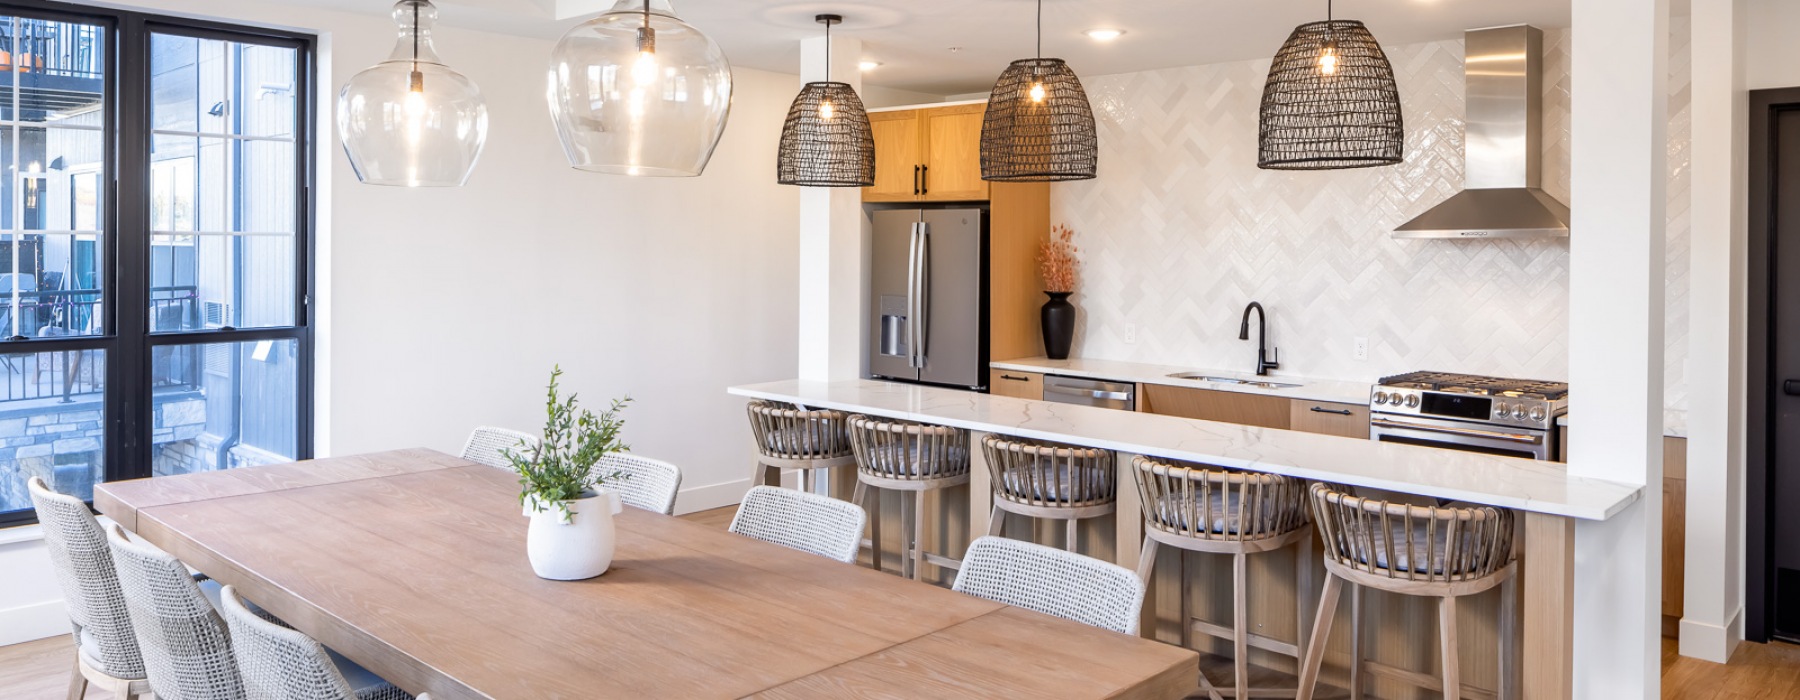 Entertaining kitchen with harvest-style seating